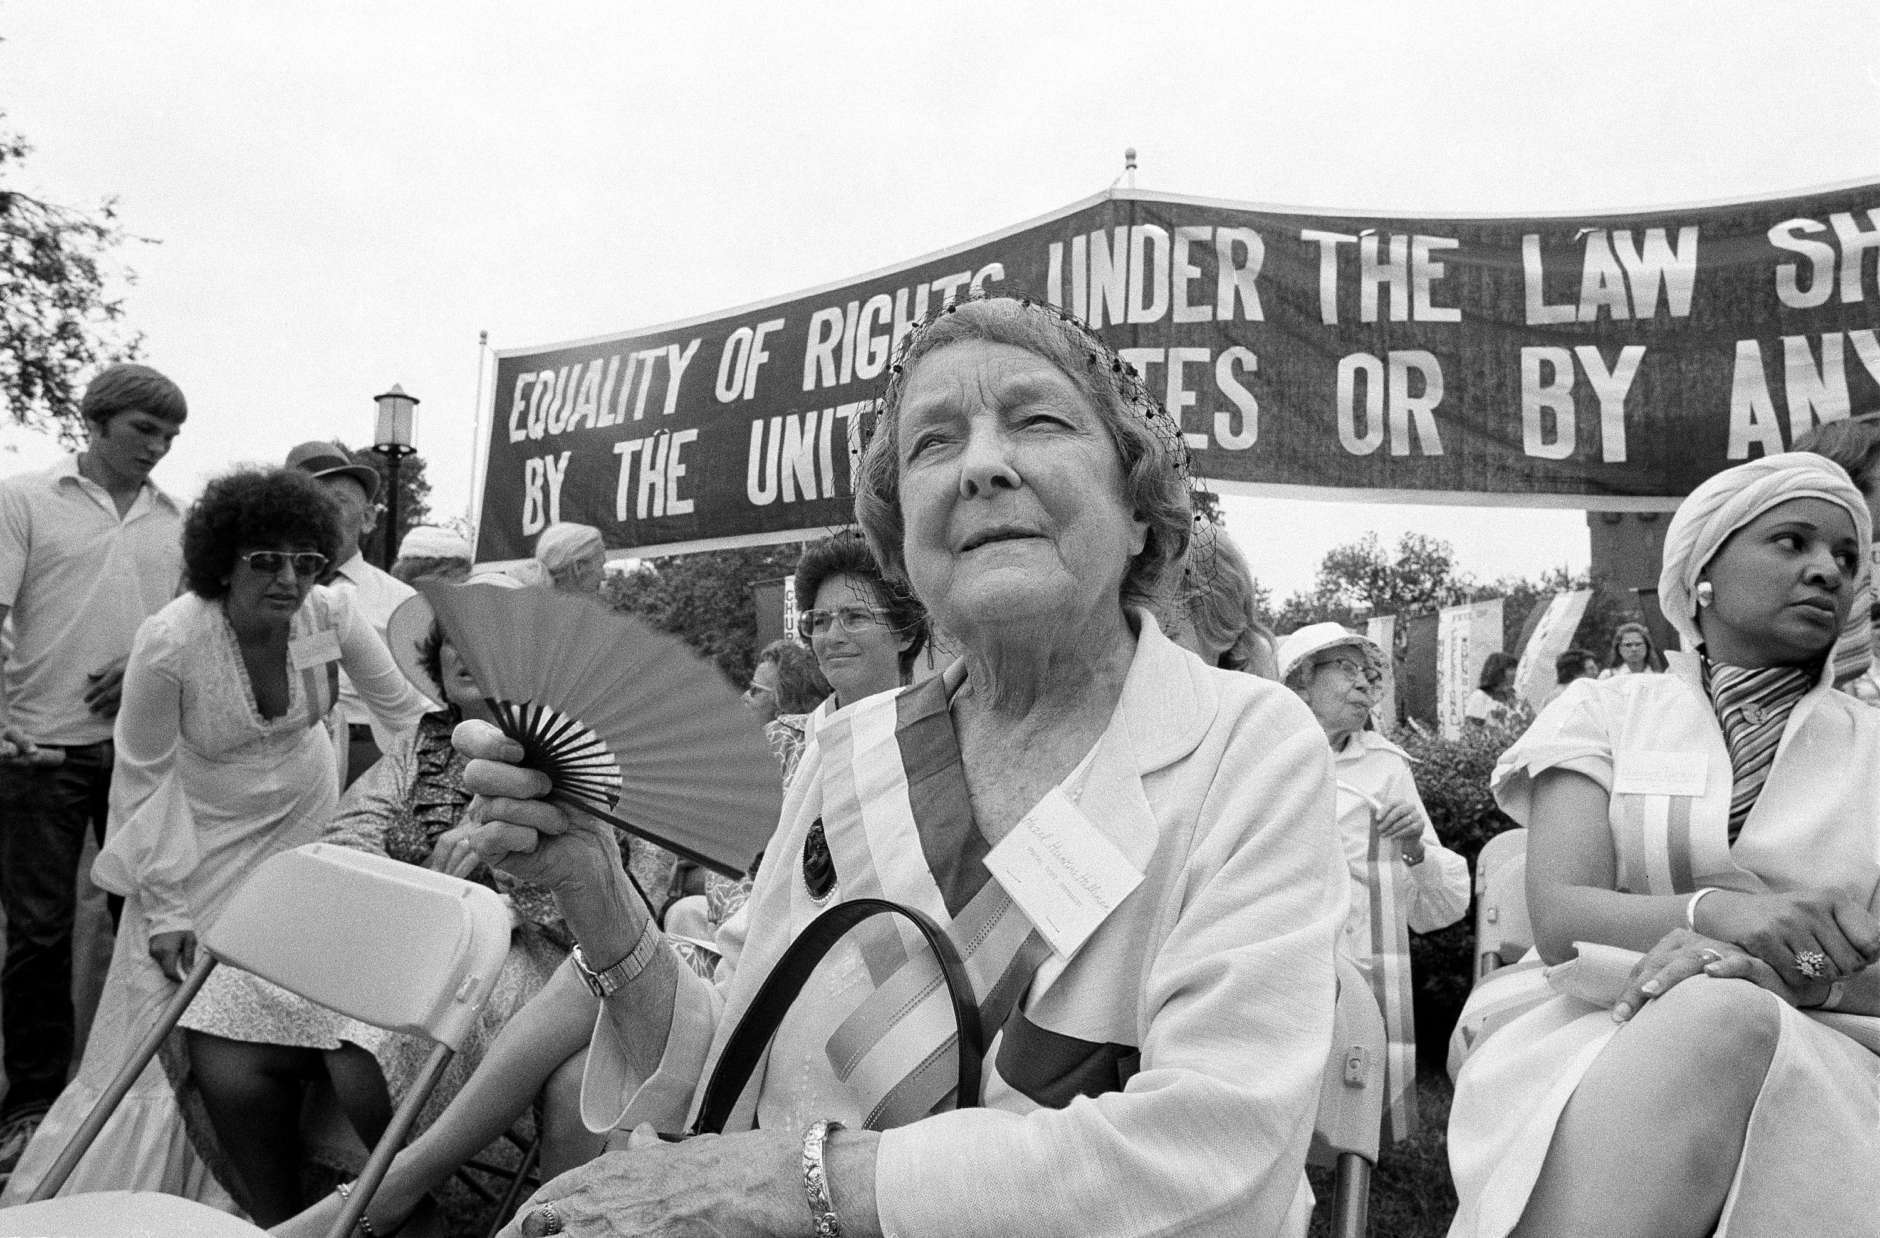 Hazel Hunkines Hallinnan, one of the original suffragist, fans herself after marching with supports of the Equal Rights Amendment down Pennsylvania Avenue in Washington on August 26, 1977. Thousands of women participated in the march which coincided with the 57th anniversary of womens suffrage. (AP Photo)